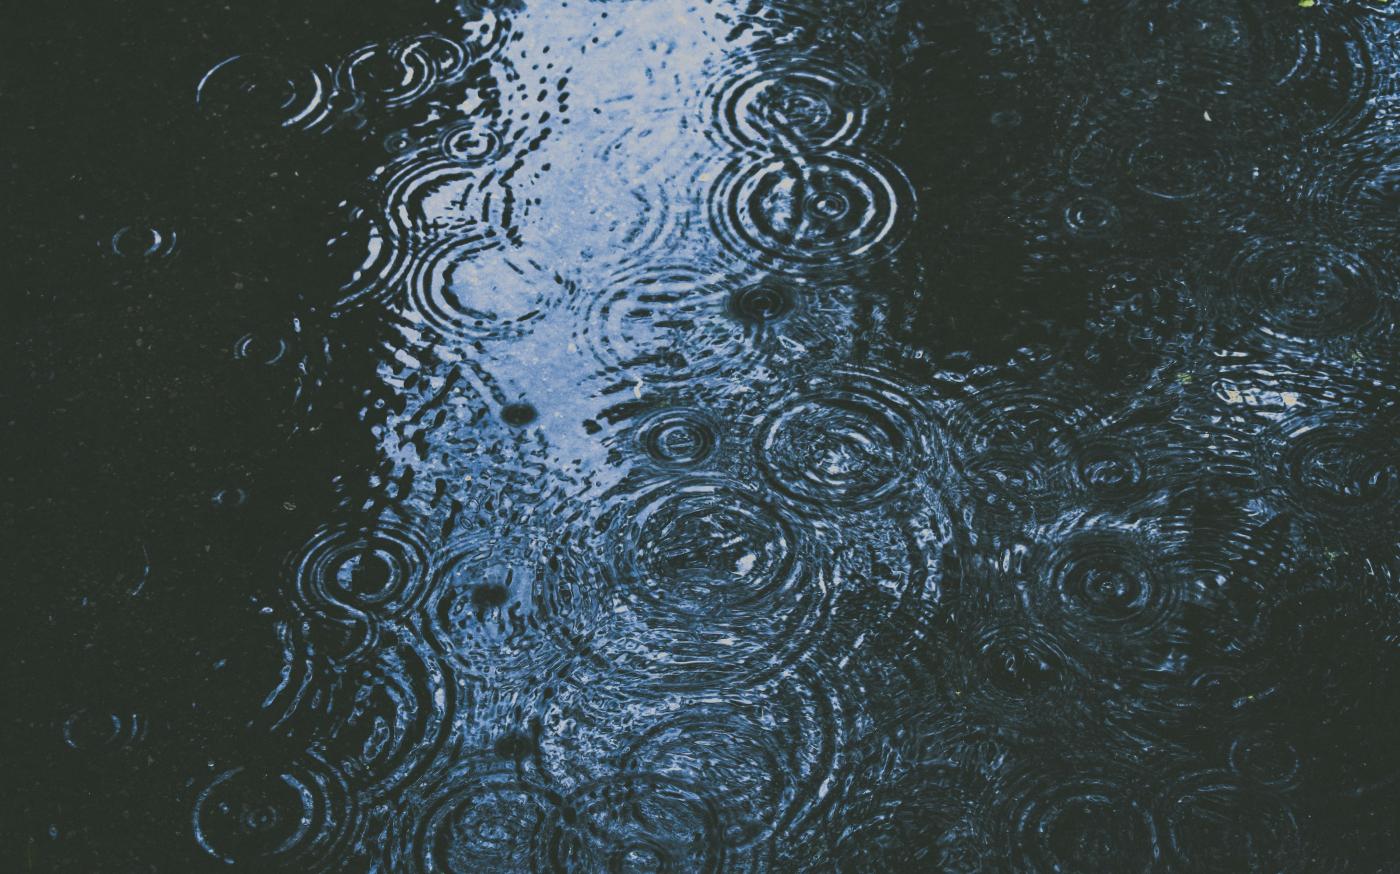 photo of body of water and droplets by Alex Dukhanov courtesy of Unsplash.